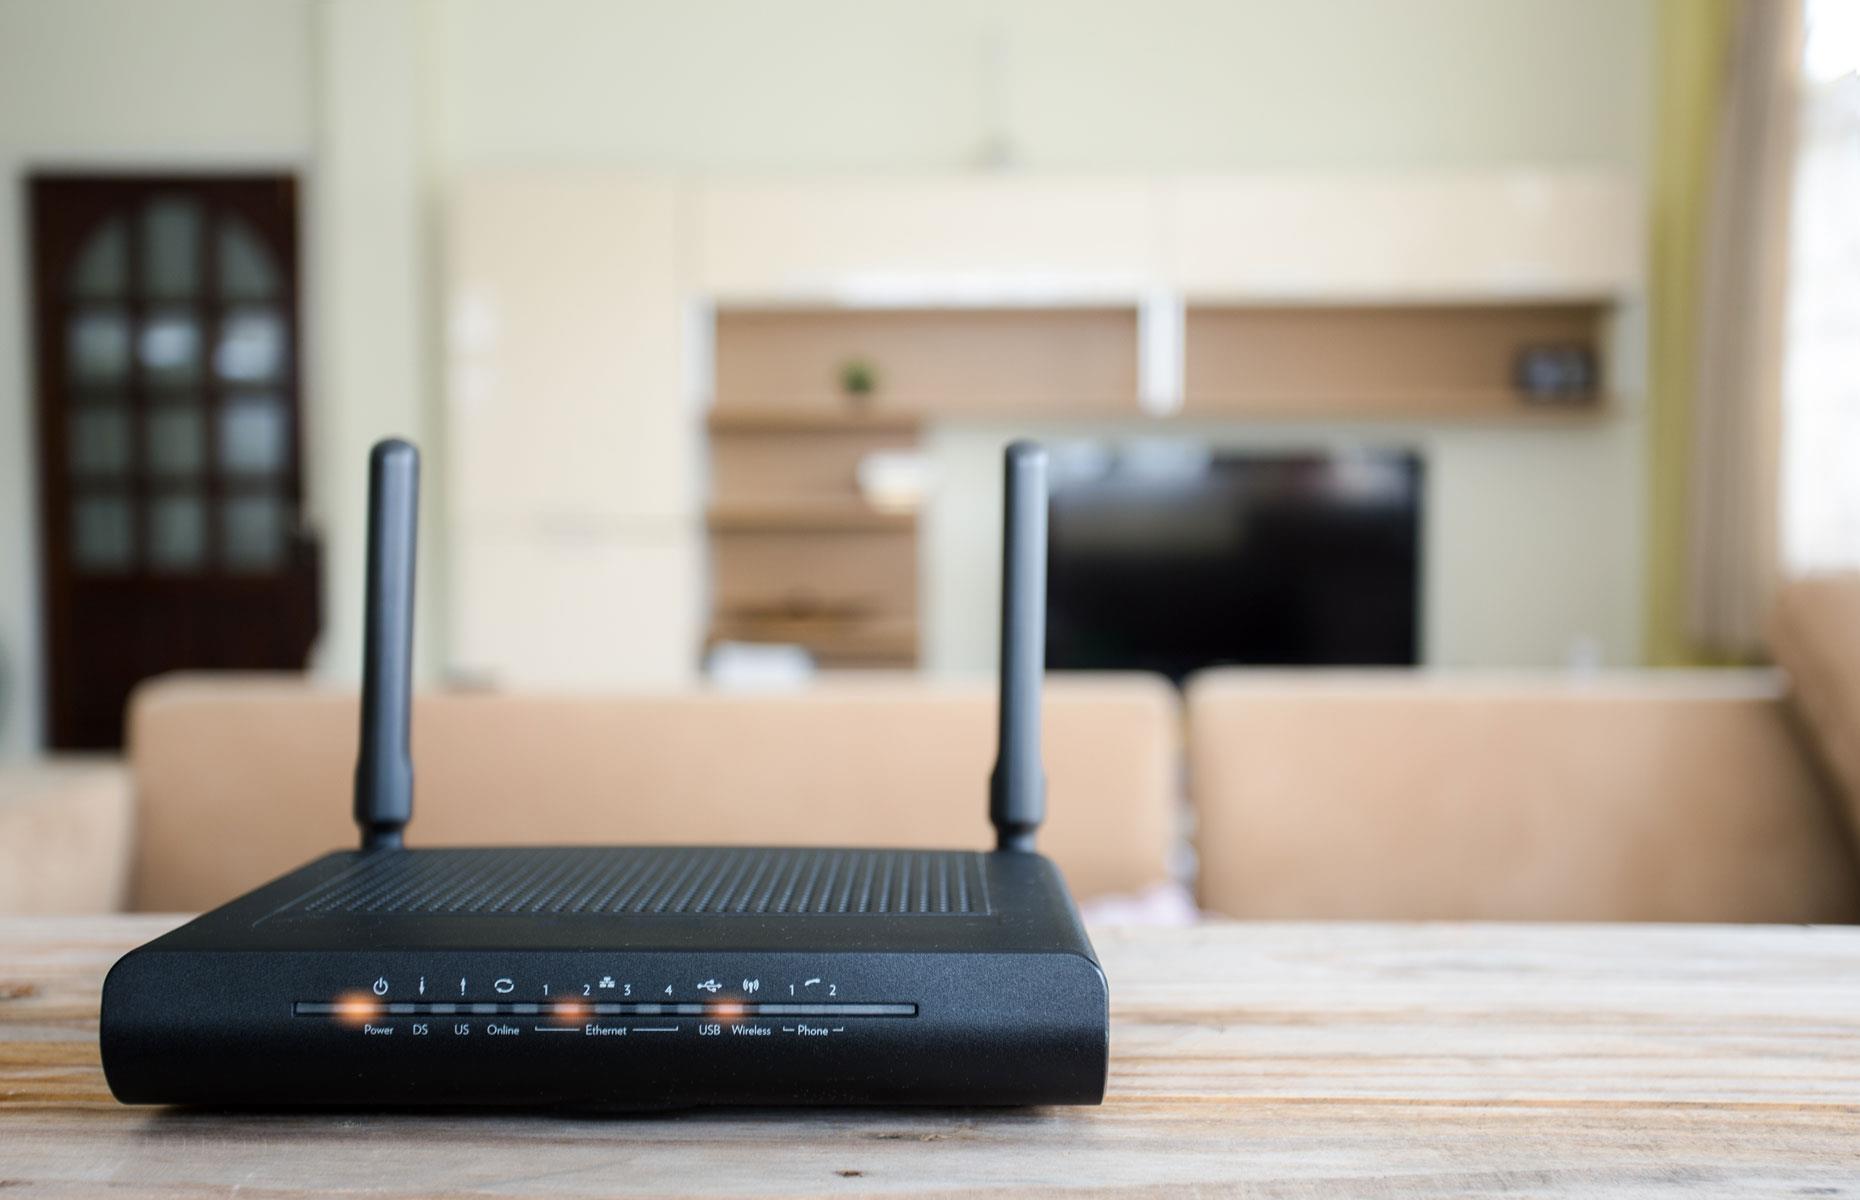 Keep your router away from electrical and wireless devices